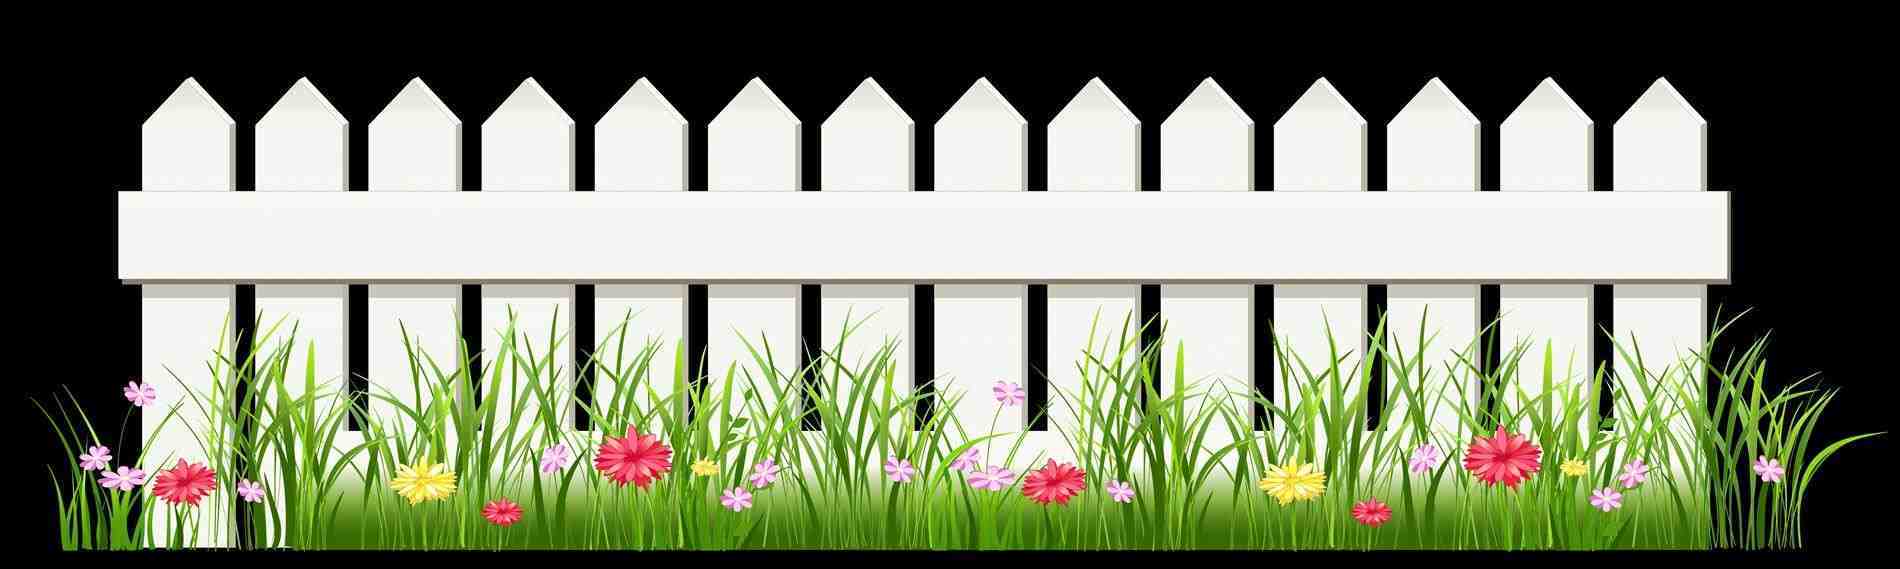 In color rhmozirucom gate garden fence clipart clipart garden fence pencil  and in color rhmozirucom highquality